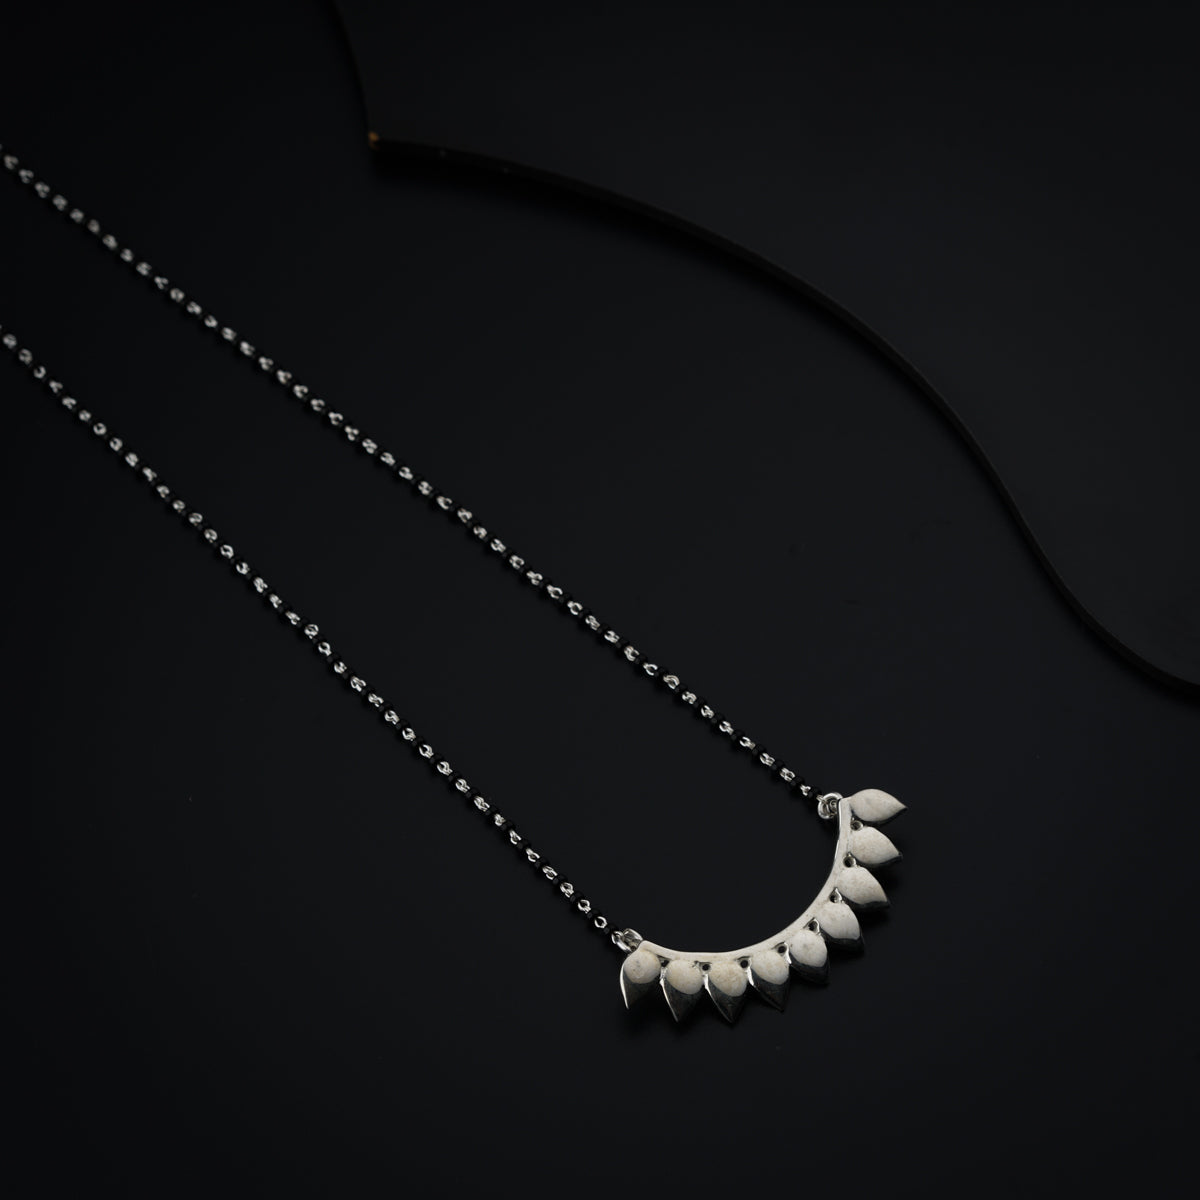 a necklace with five small white hearts hanging from it